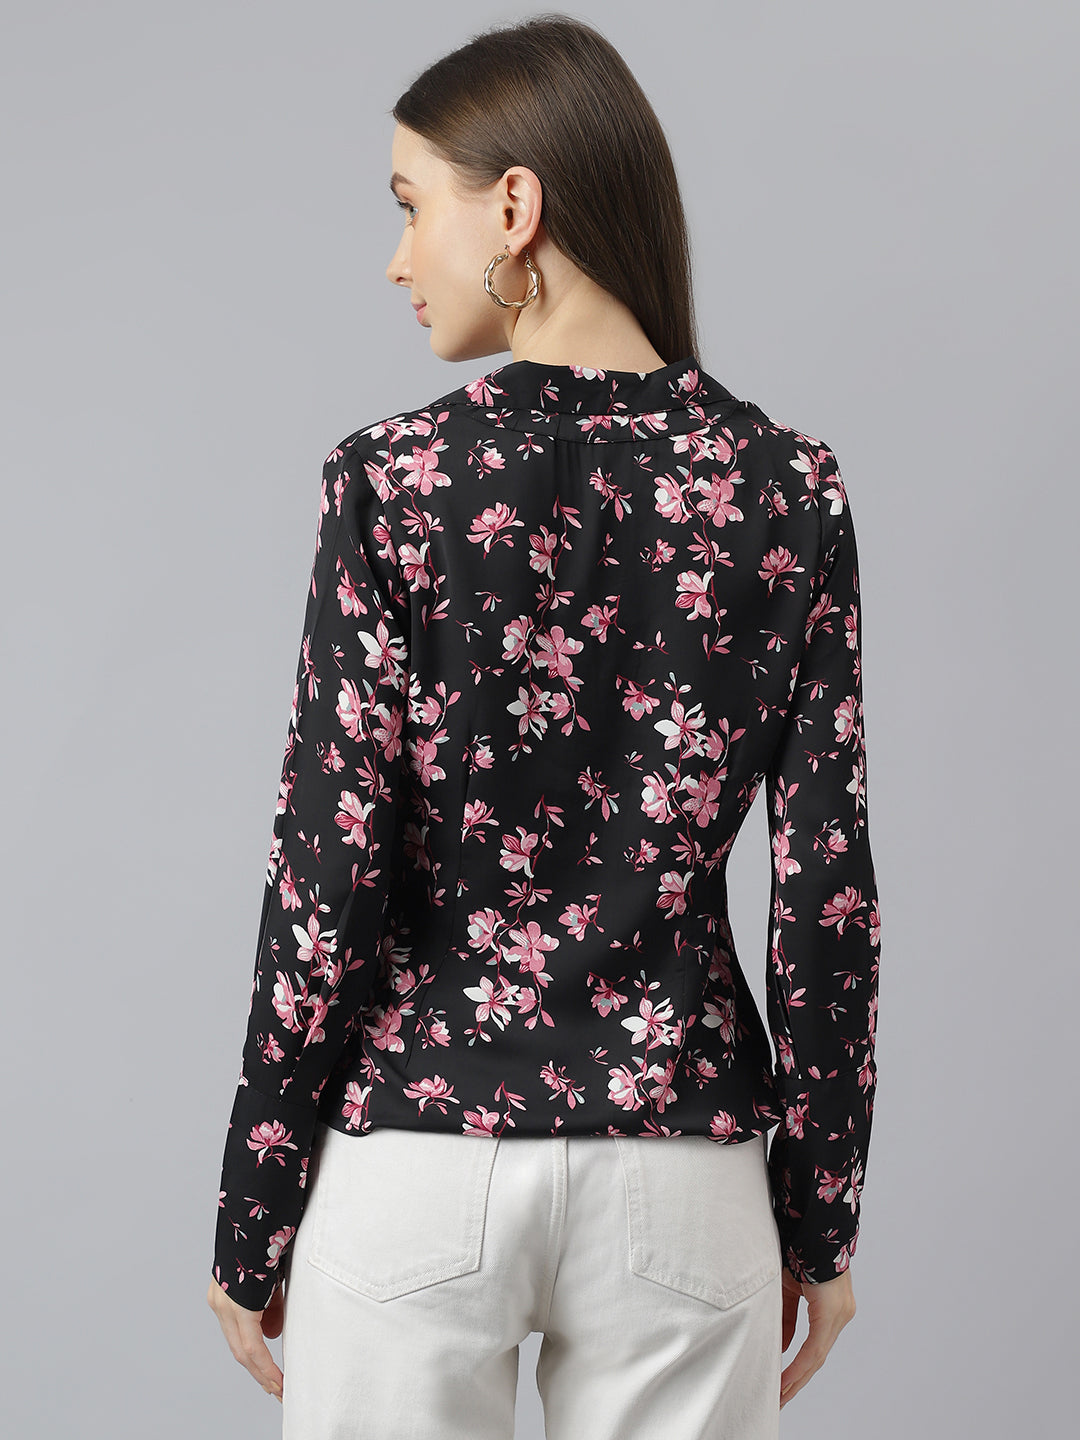 Black Full Sleeve Collar Neck Floral Print Women Shirt for Casual